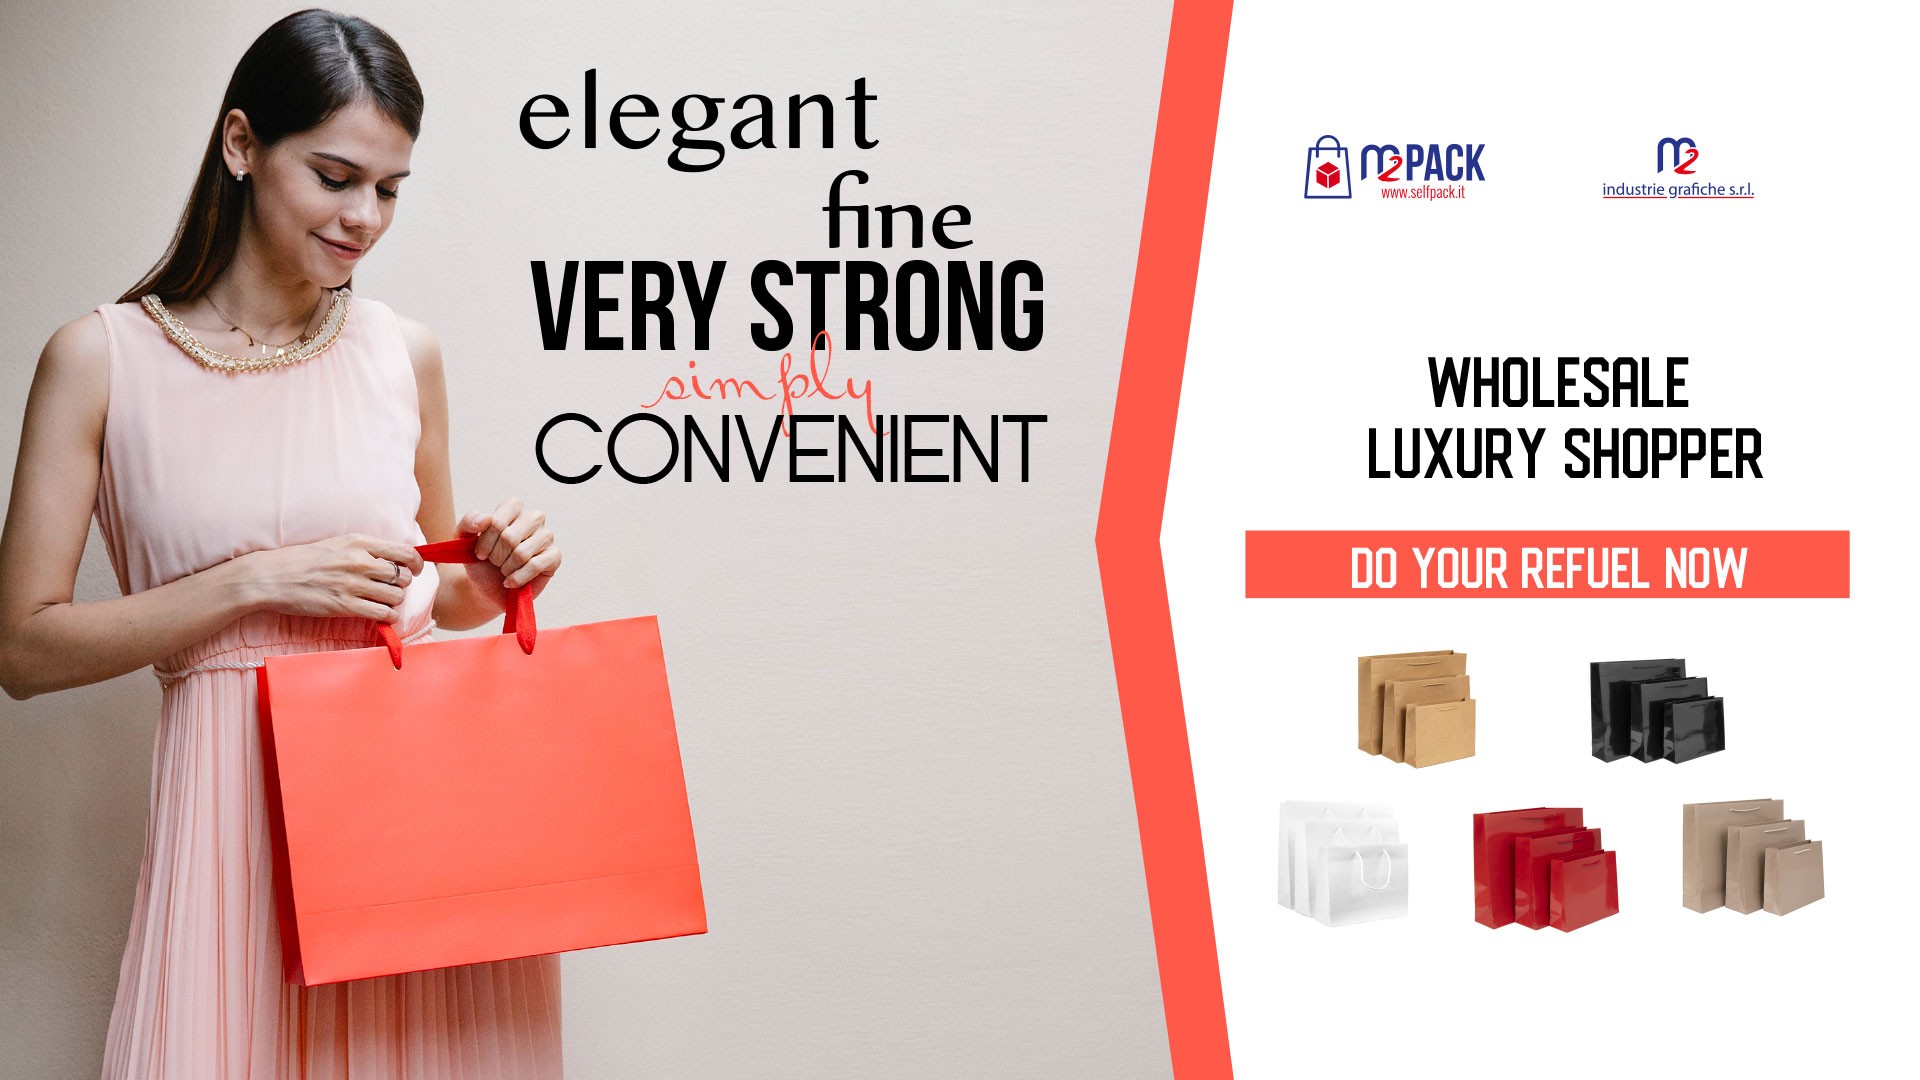 LUXURY SHOPPERS • ELEGANT • VERY STRONG • CONVENIENT